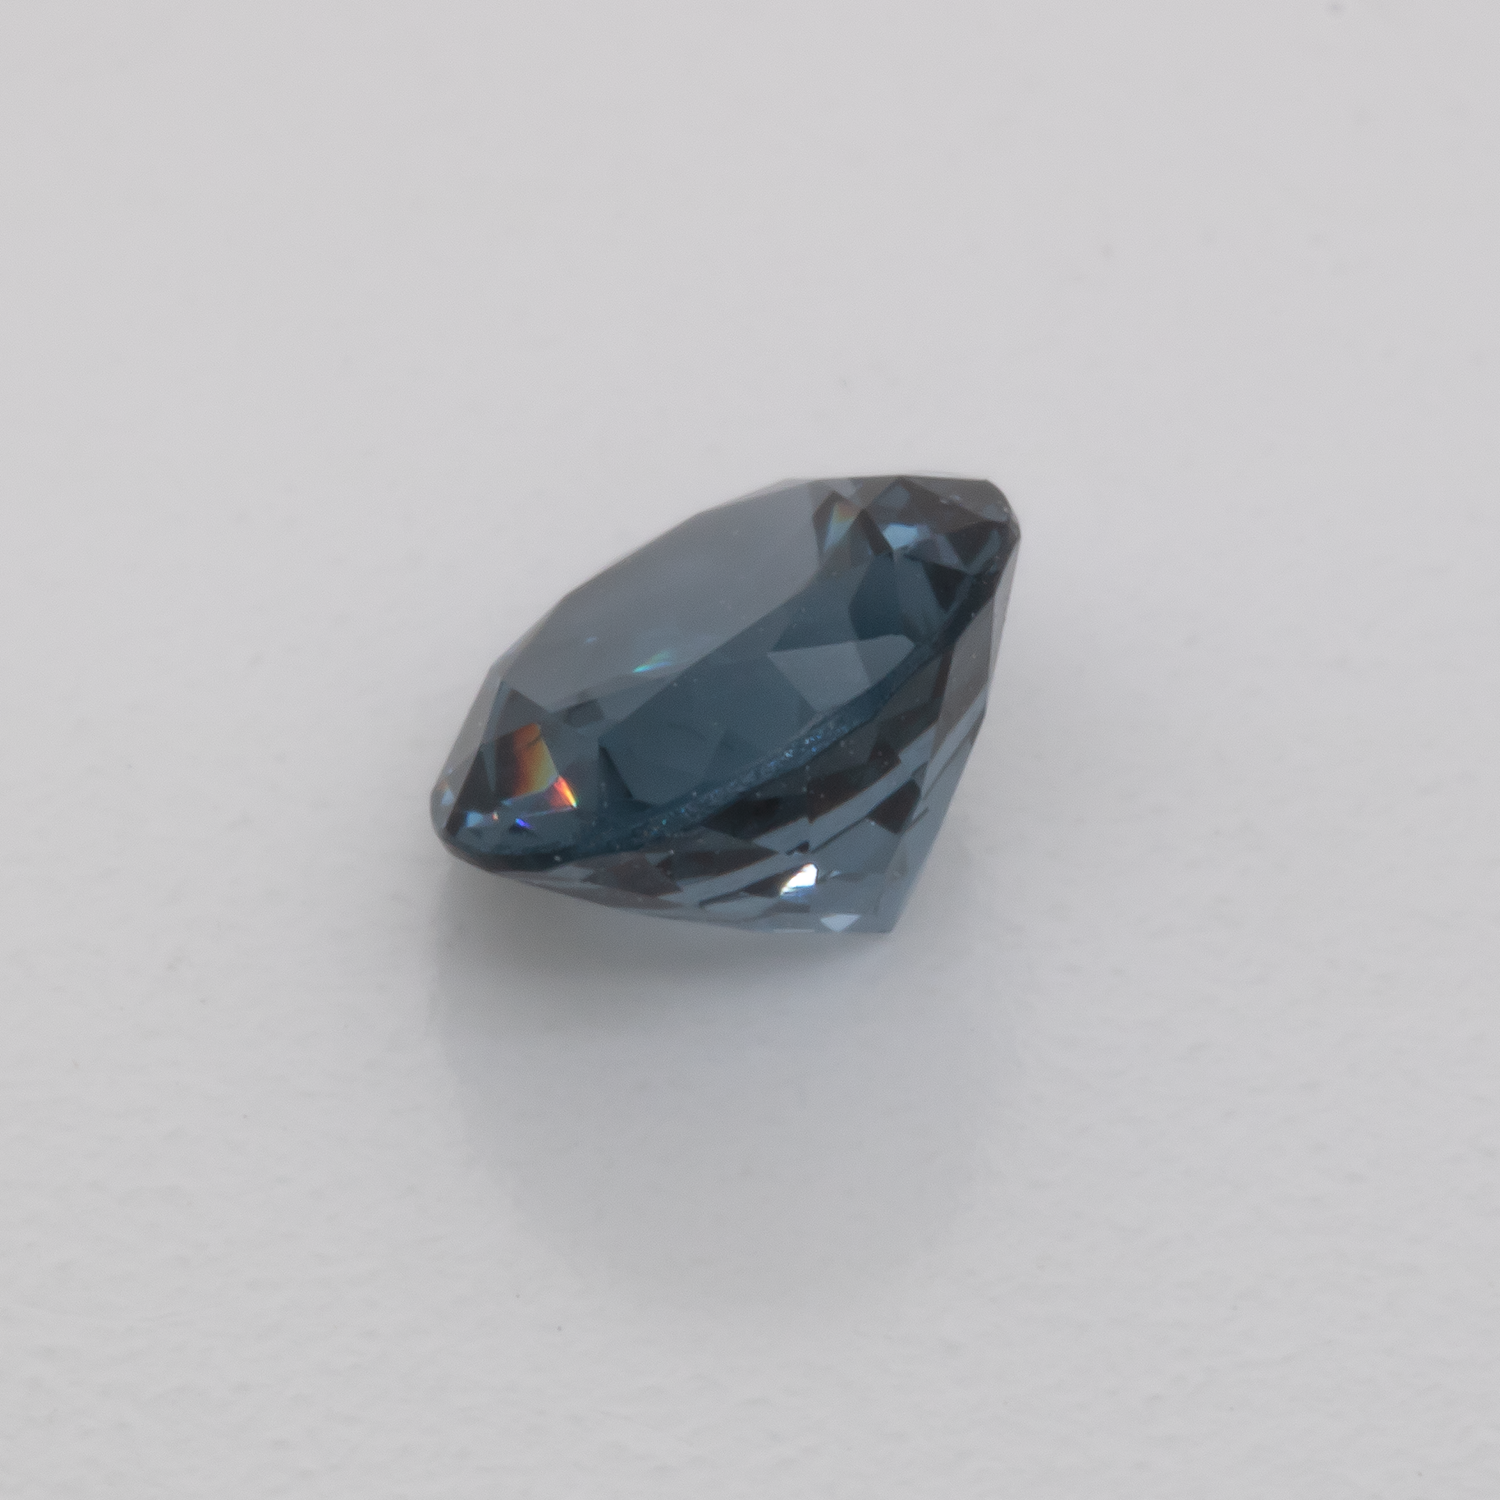 Spinel - blue, round, 5.1x5.1 mm, 0.58-0.60 cts, No. SP90007